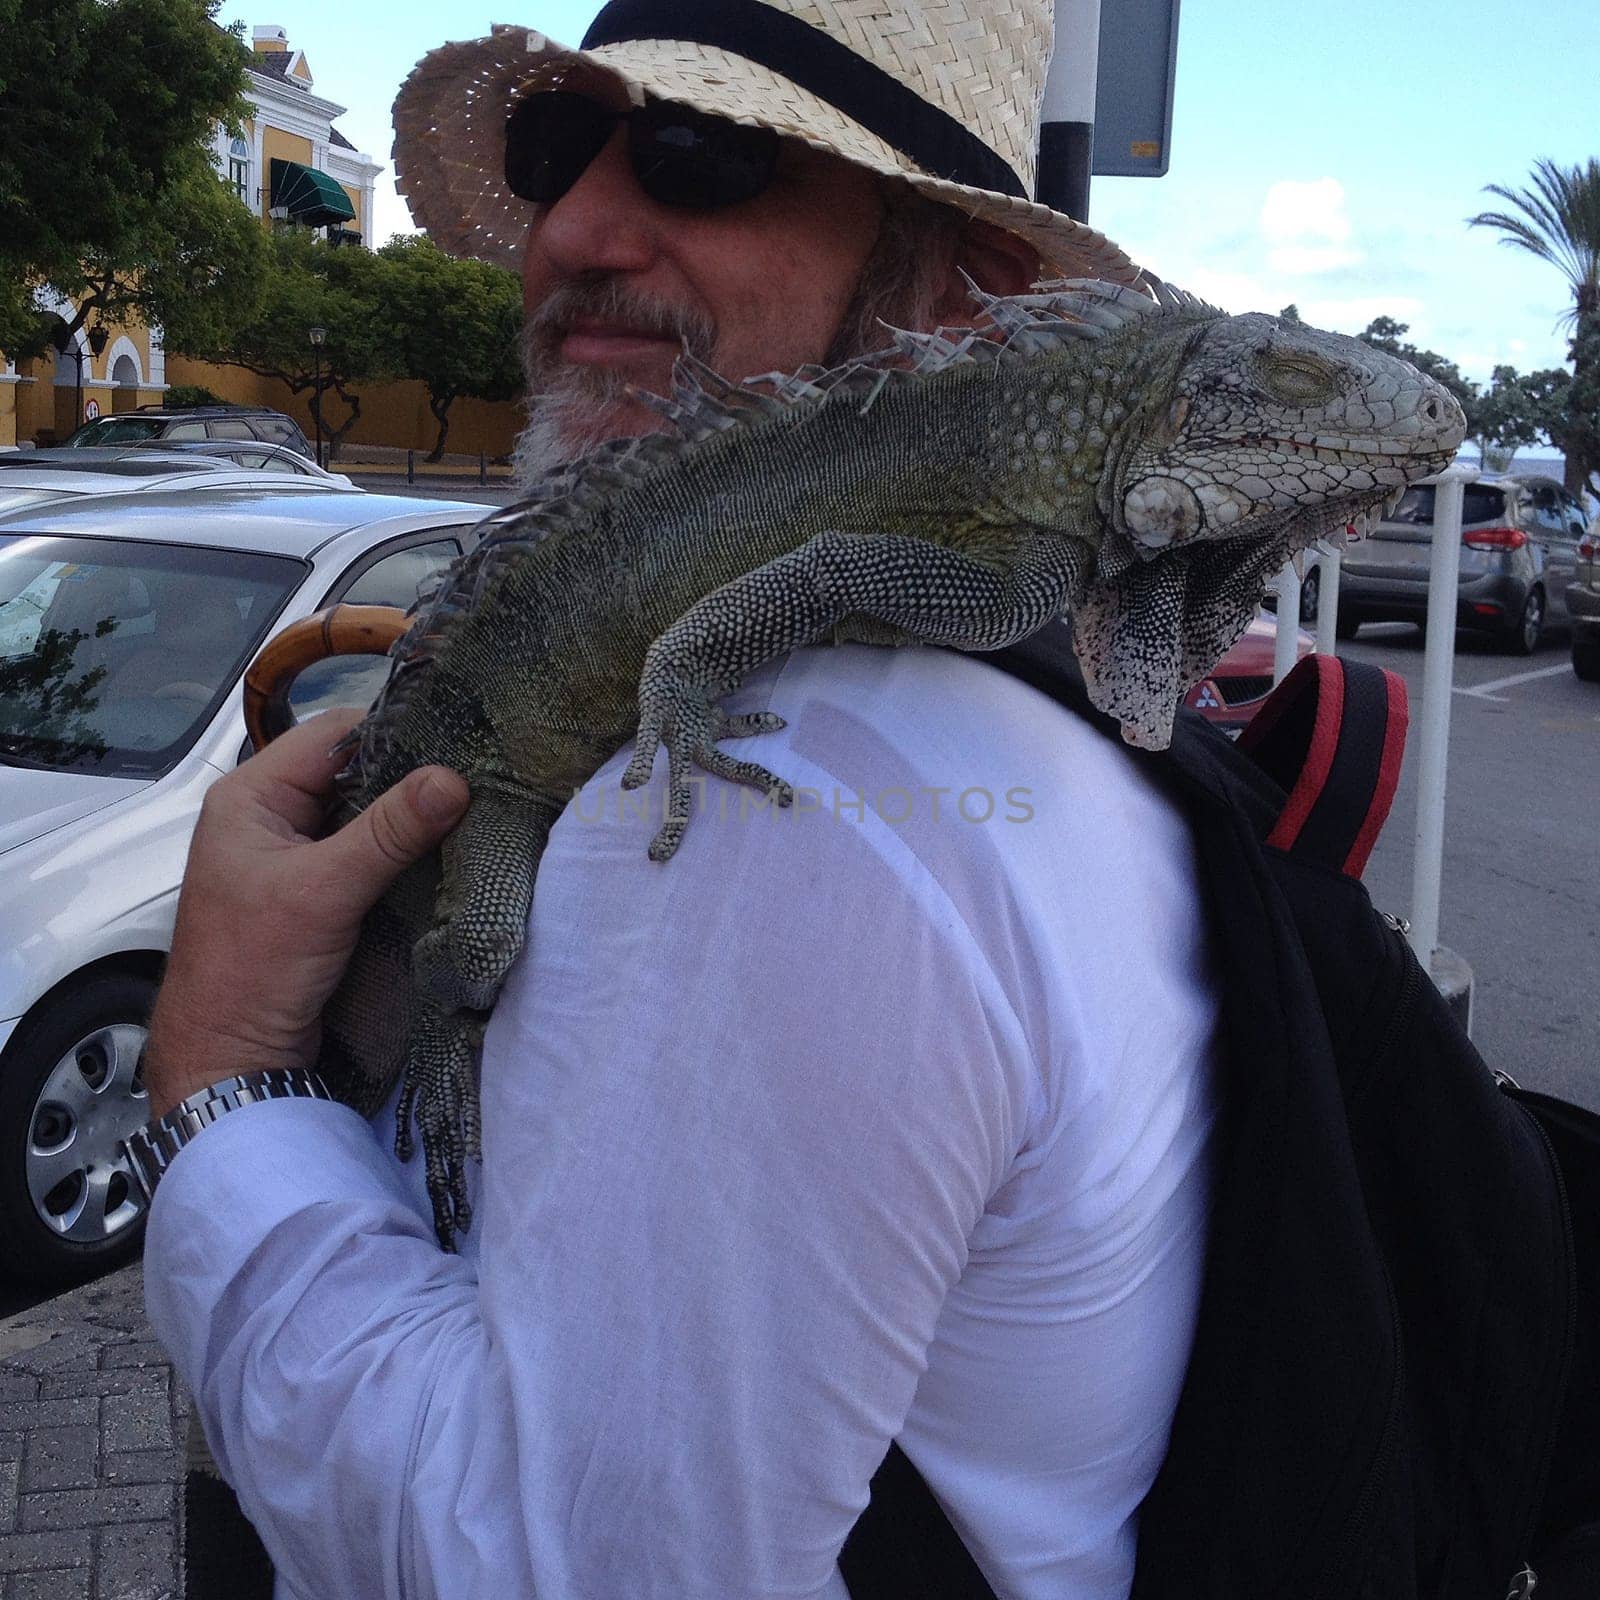 A tourist attraction on Curacao. Being photographed with an iguana. This elderly tourist enjoys the situation. A very temporary friendship between human and animal.